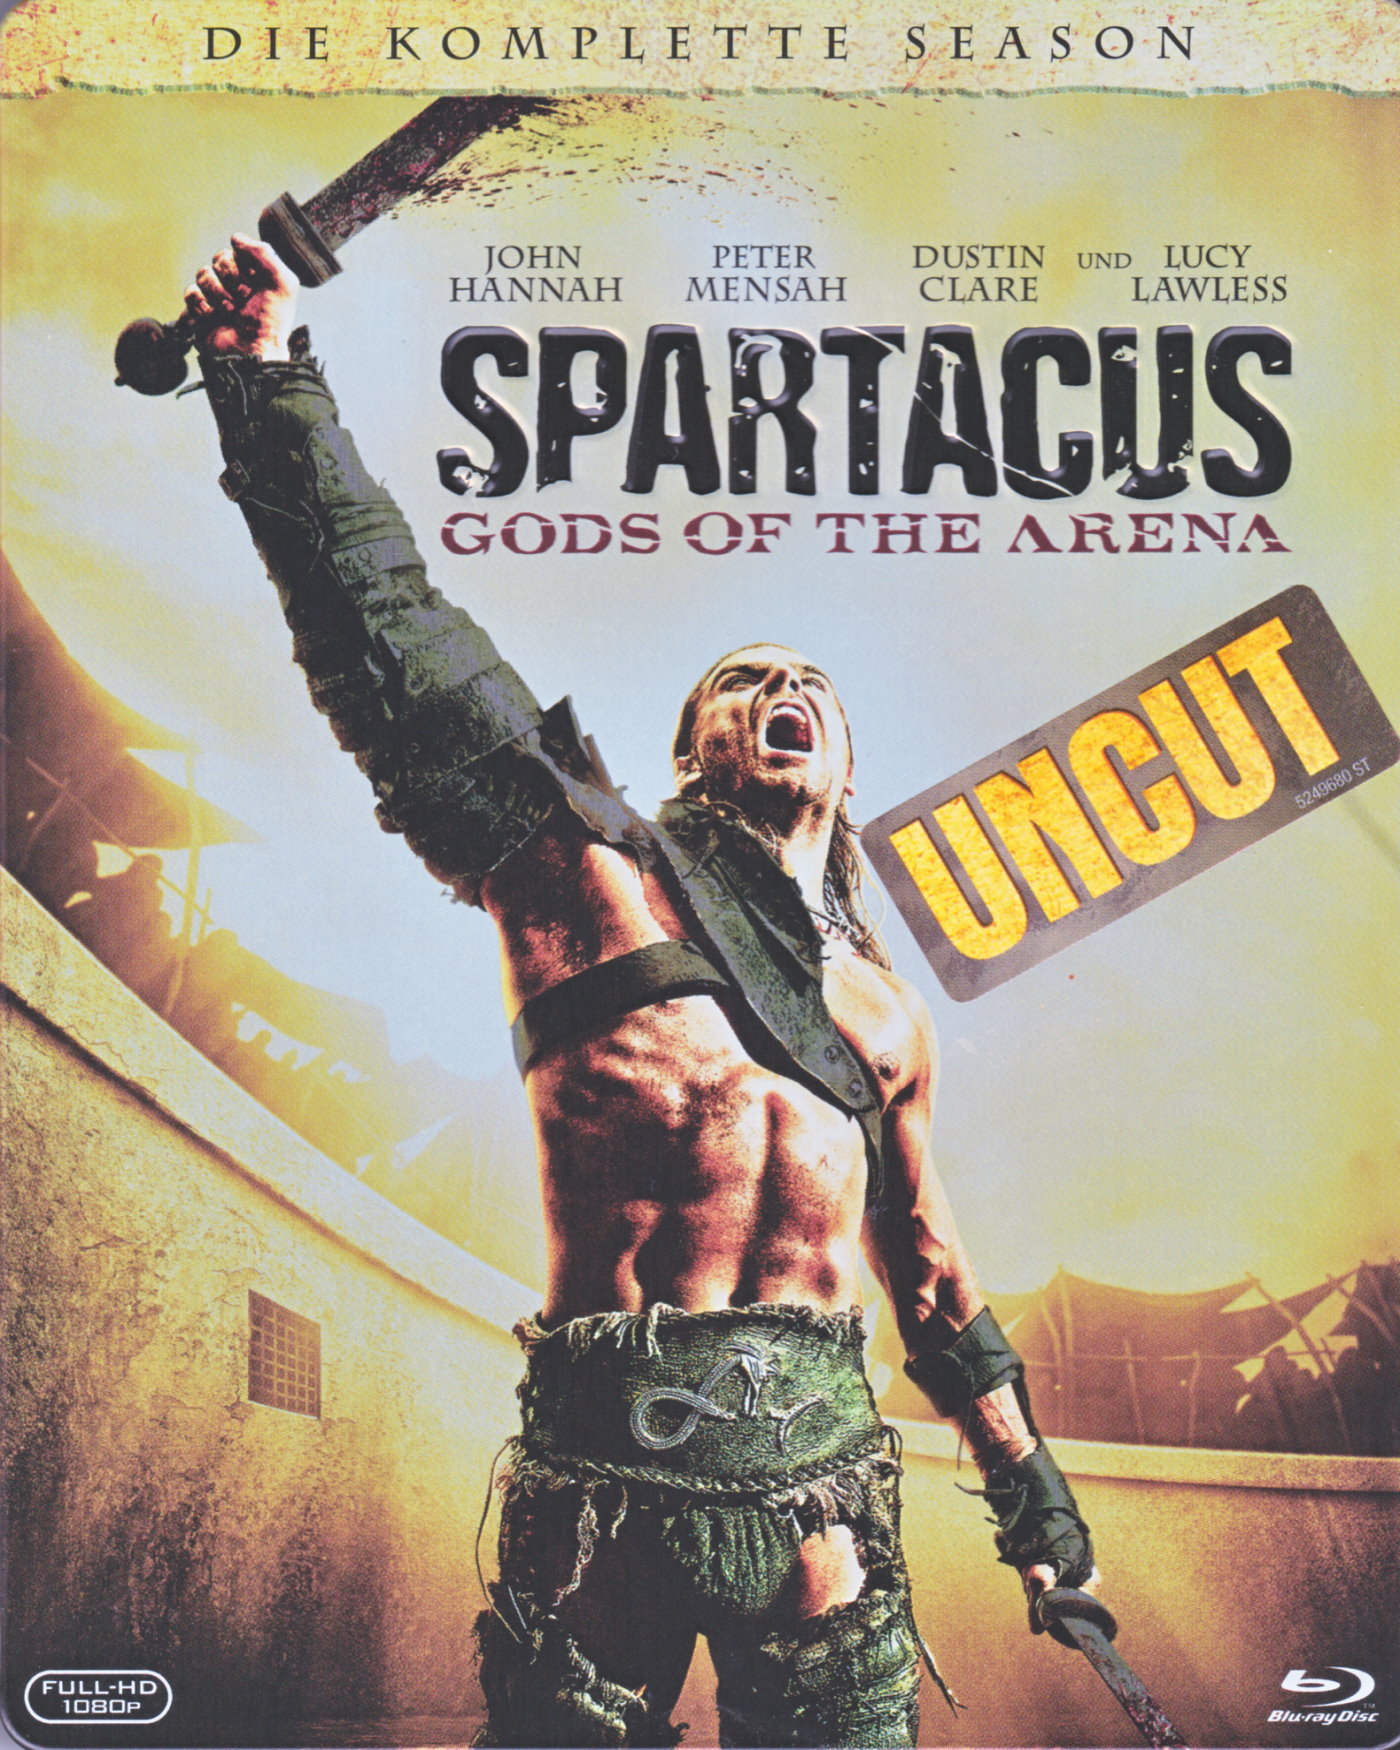 Cover - Spartacus - Gods of the Arena.jpg